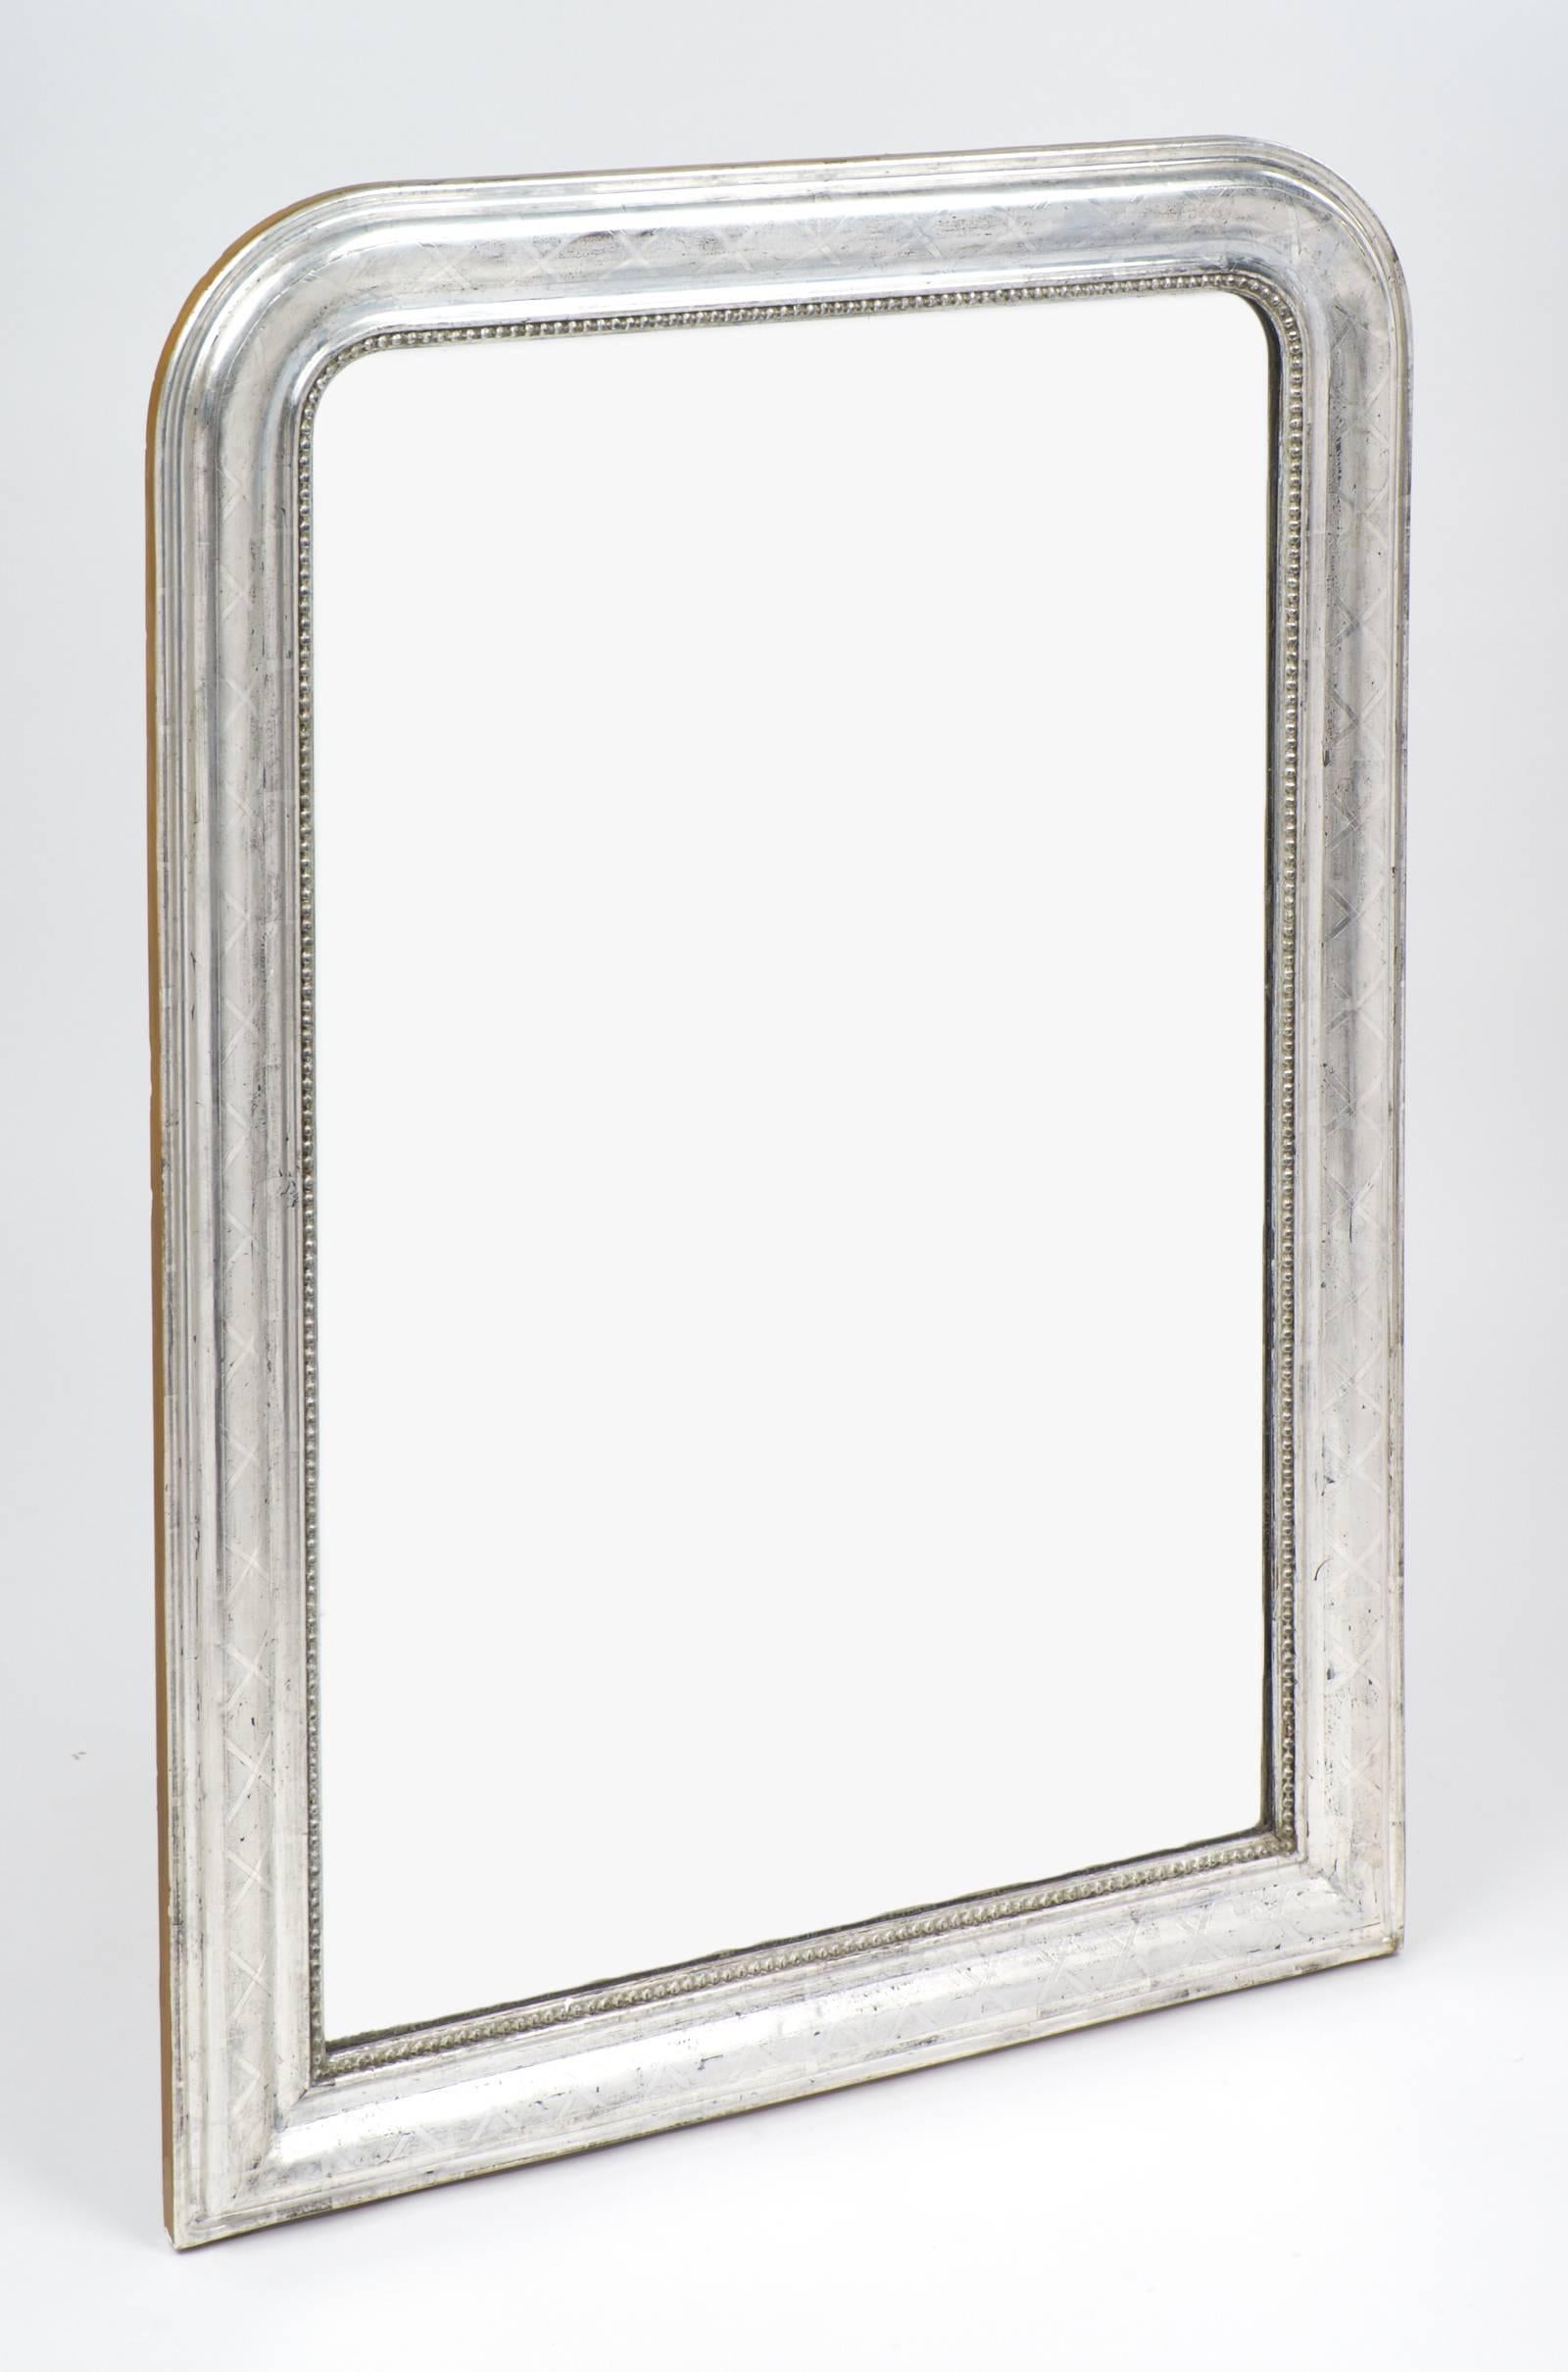 Antique French Louis Philippe period mirror. Silver leafed wood frame with beading all around and an etched geometric pattern.